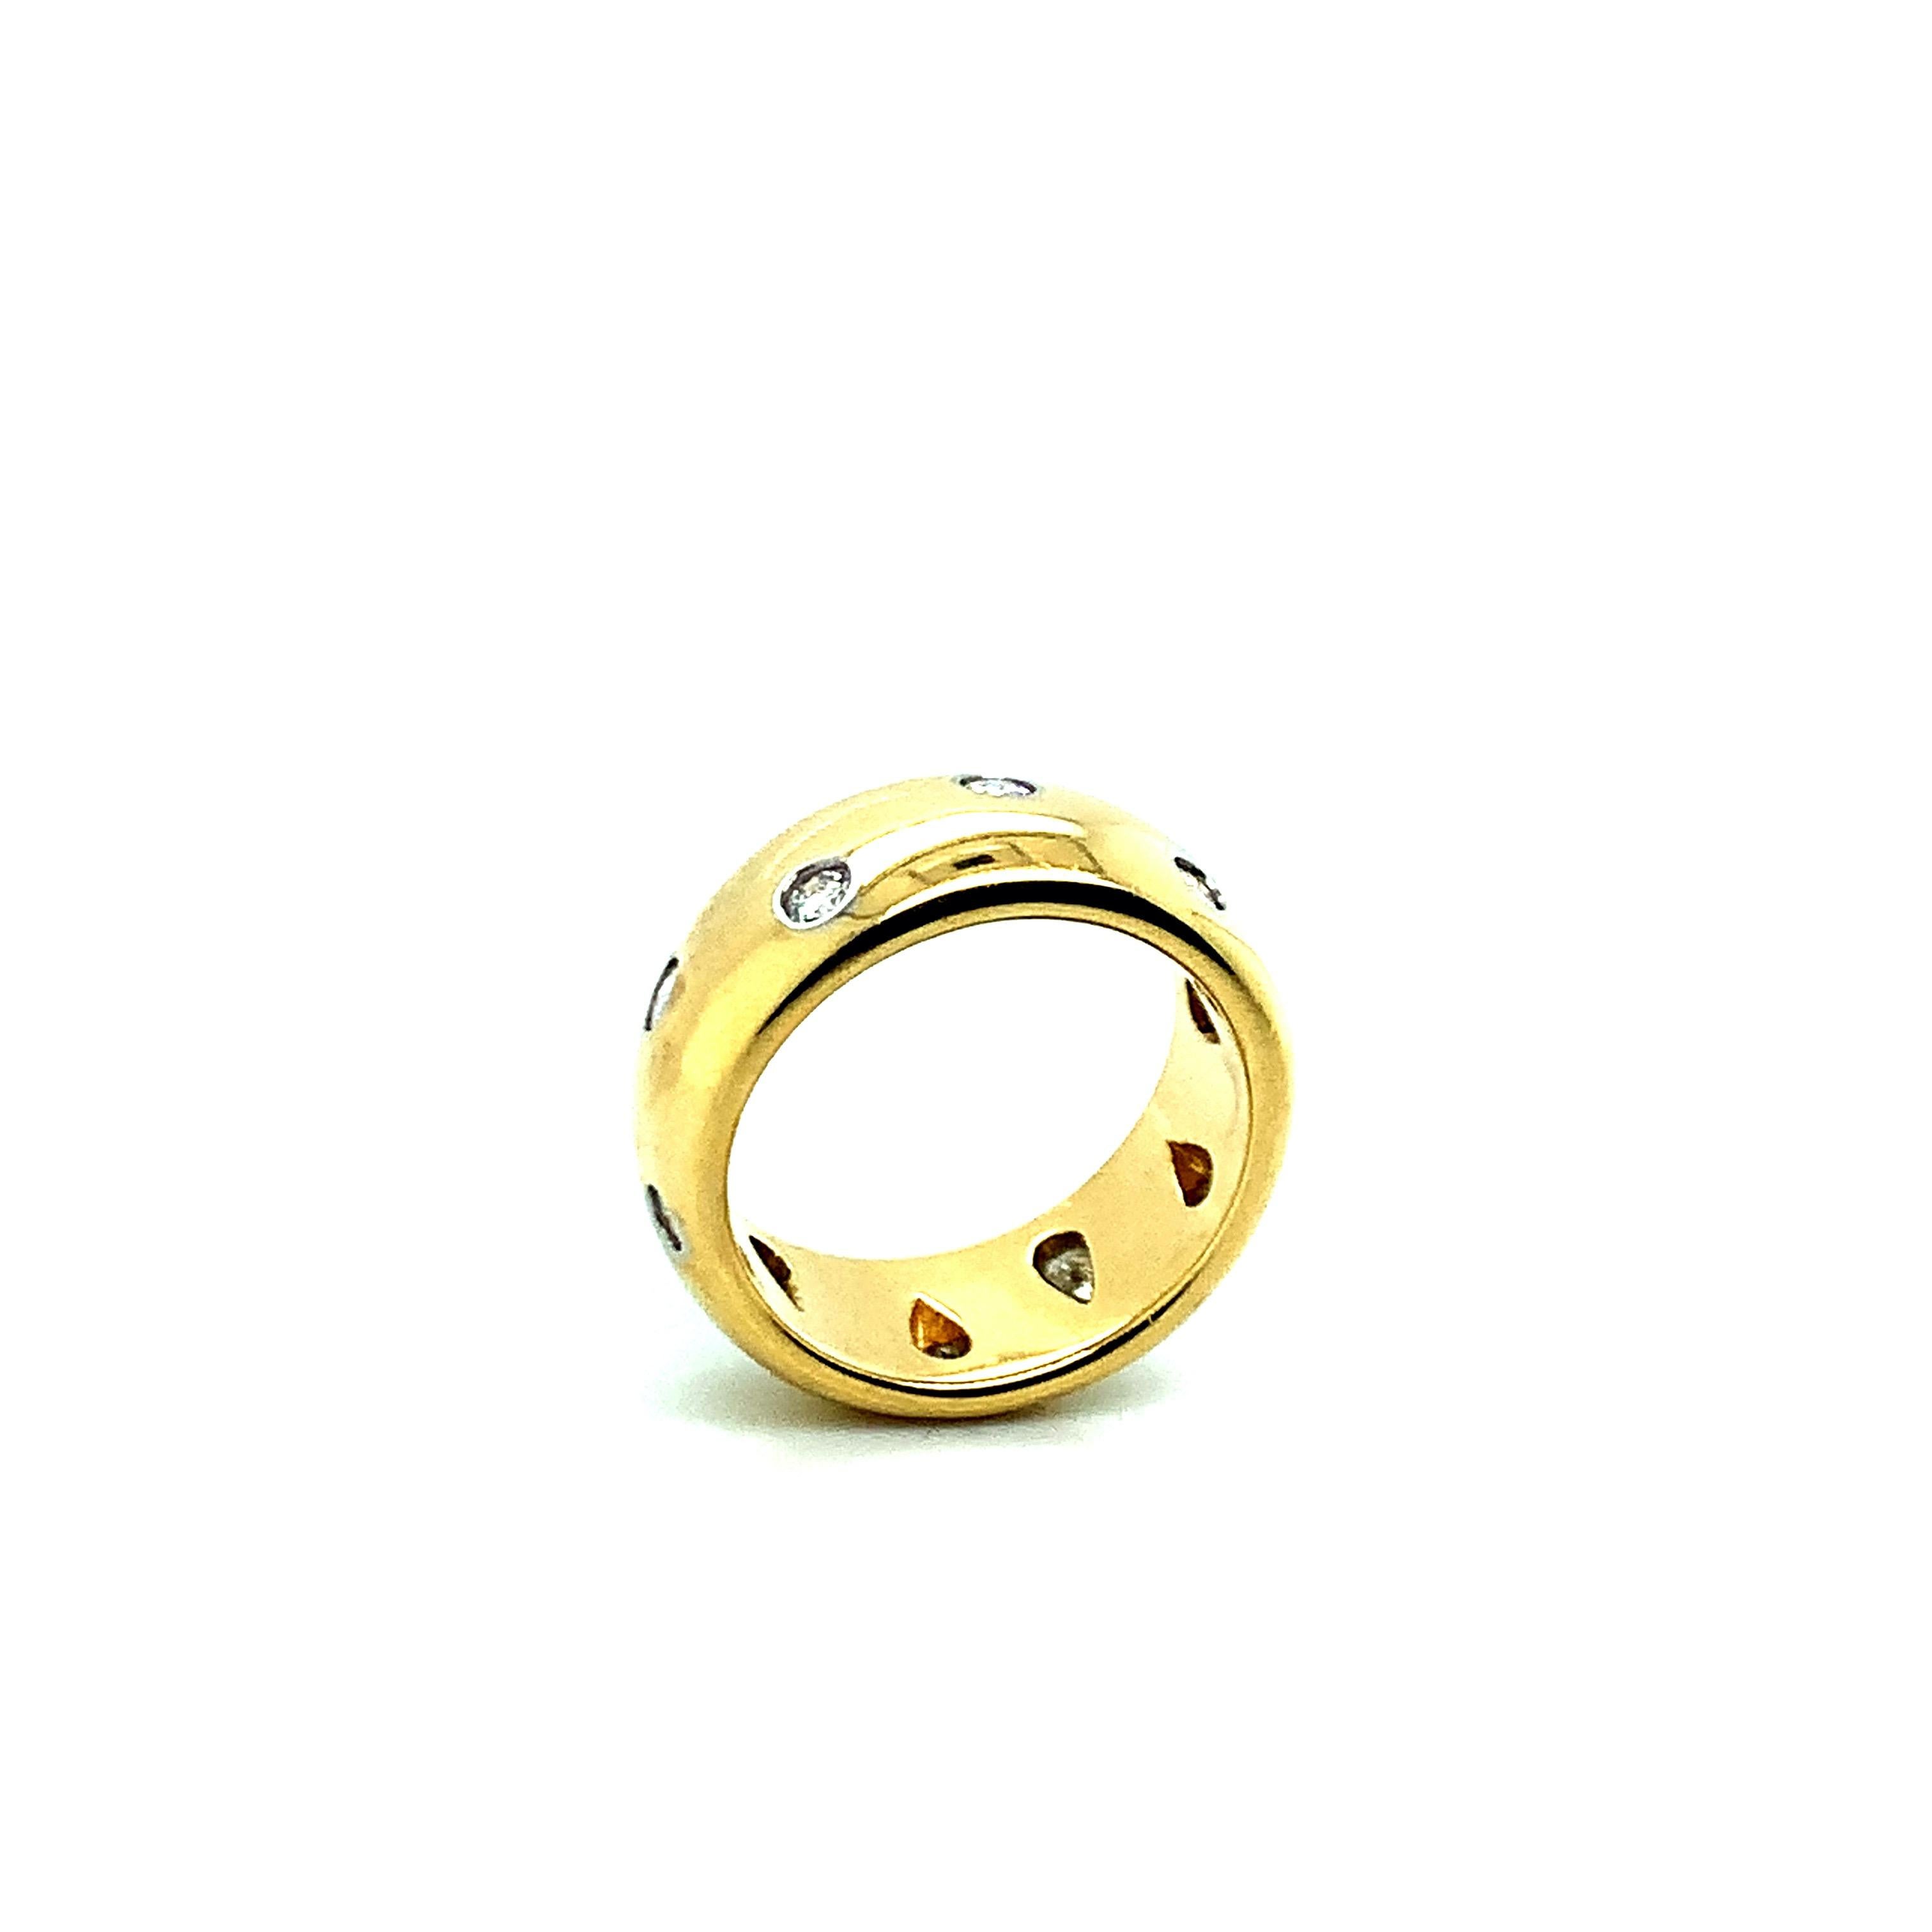 Tiffany & Co. Gold Platinum Diamond Ring In Excellent Condition For Sale In New York, NY